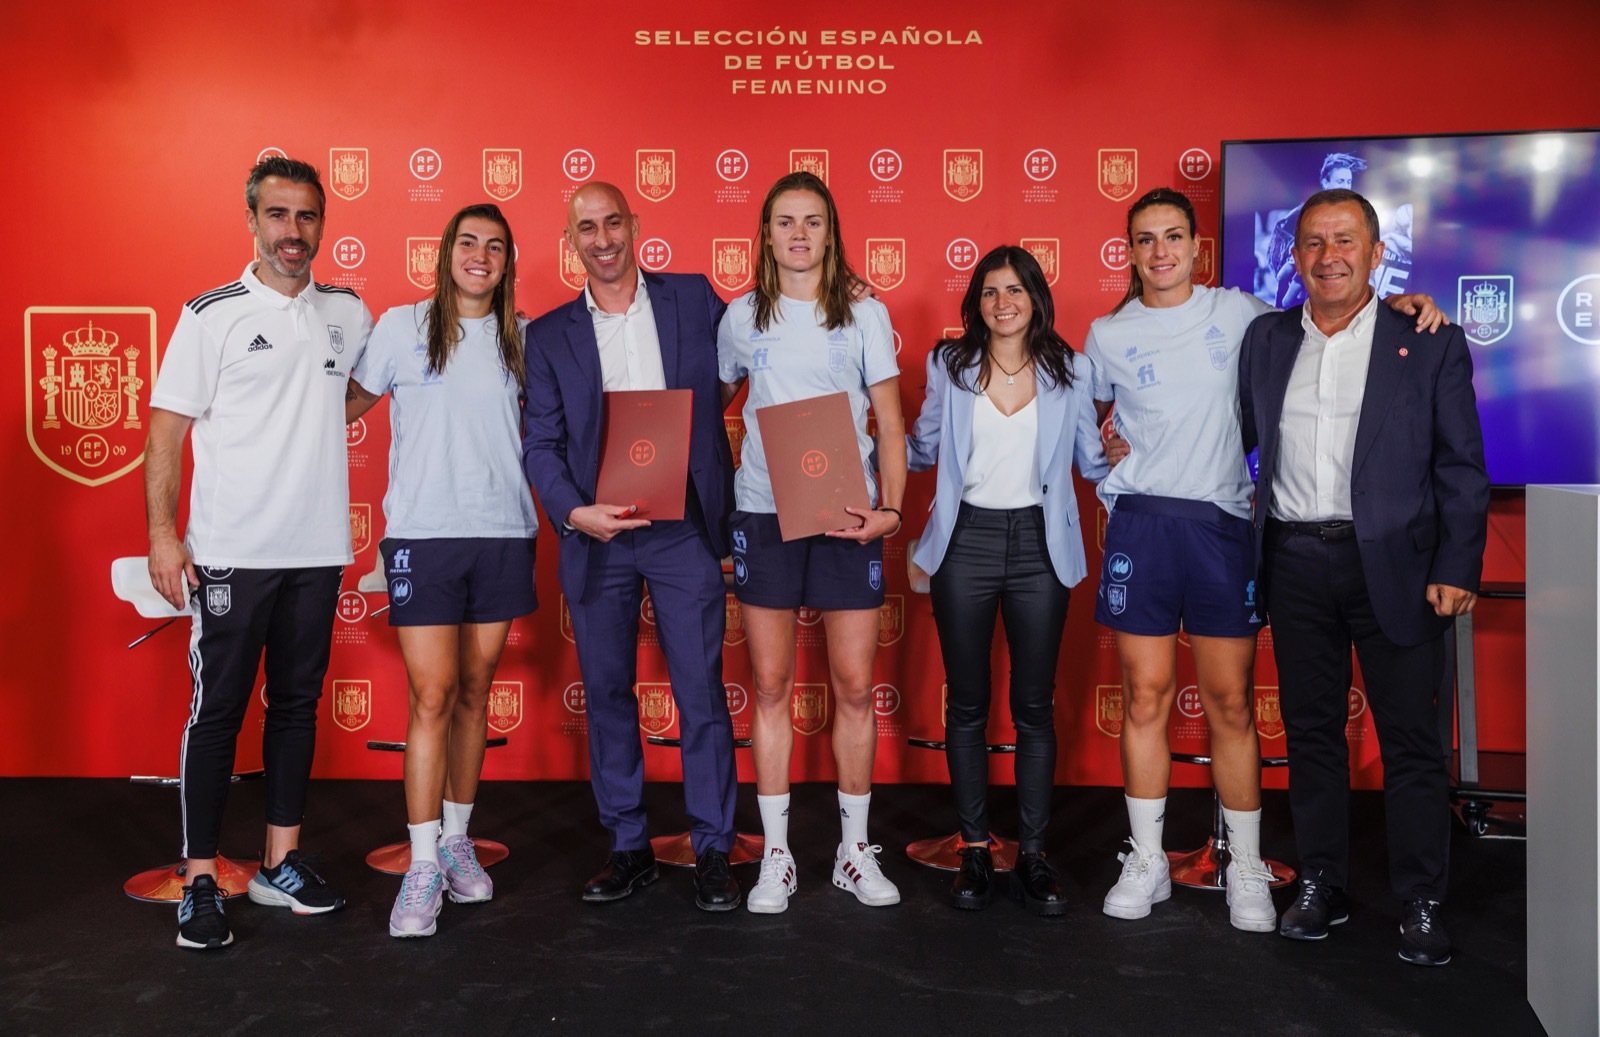 Luis Rubiales and Captain Irene Paredes have the document of agreement.